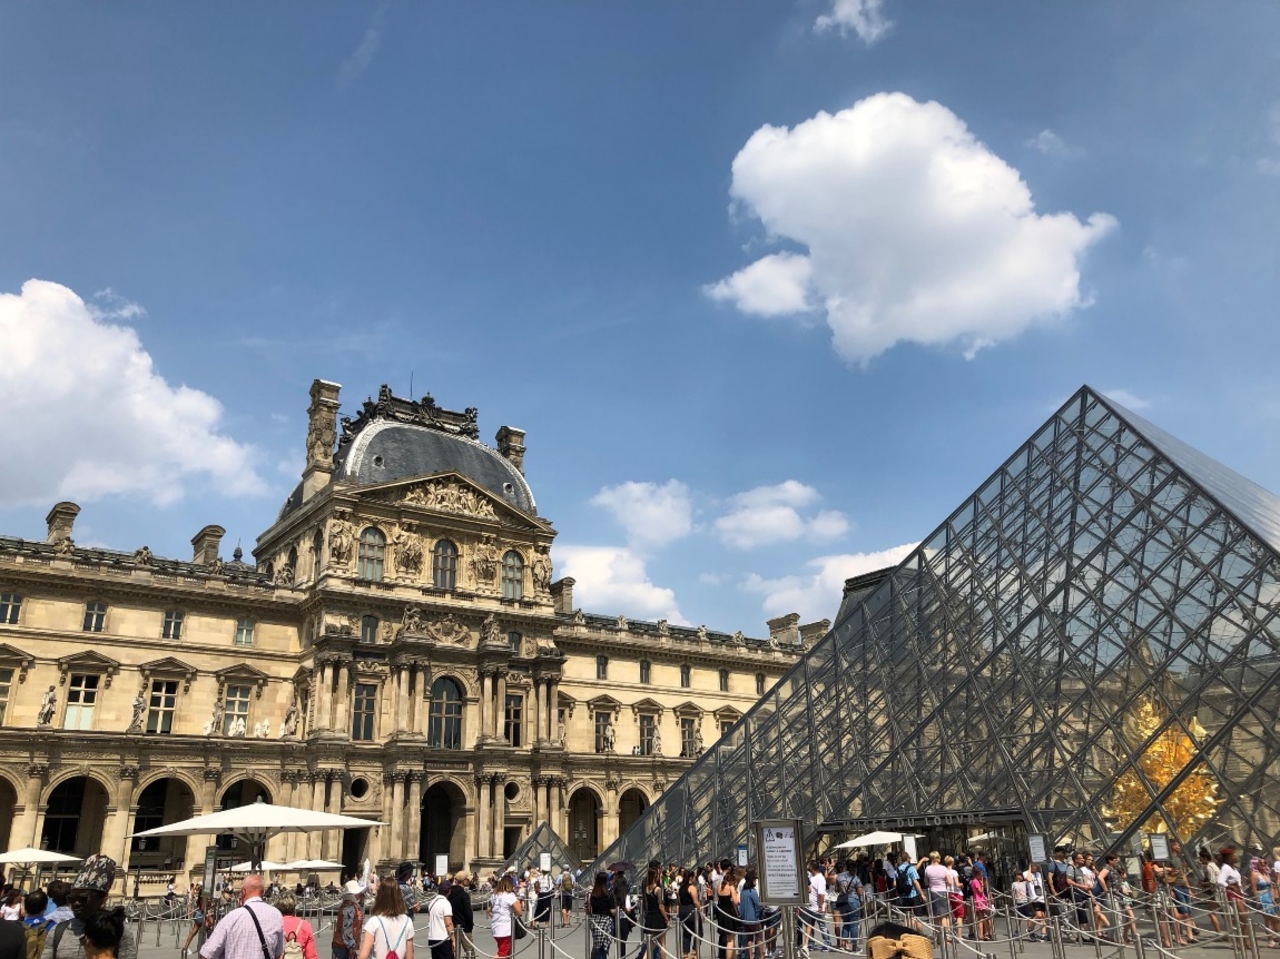 The Louvre museum crowded with people on a weekend